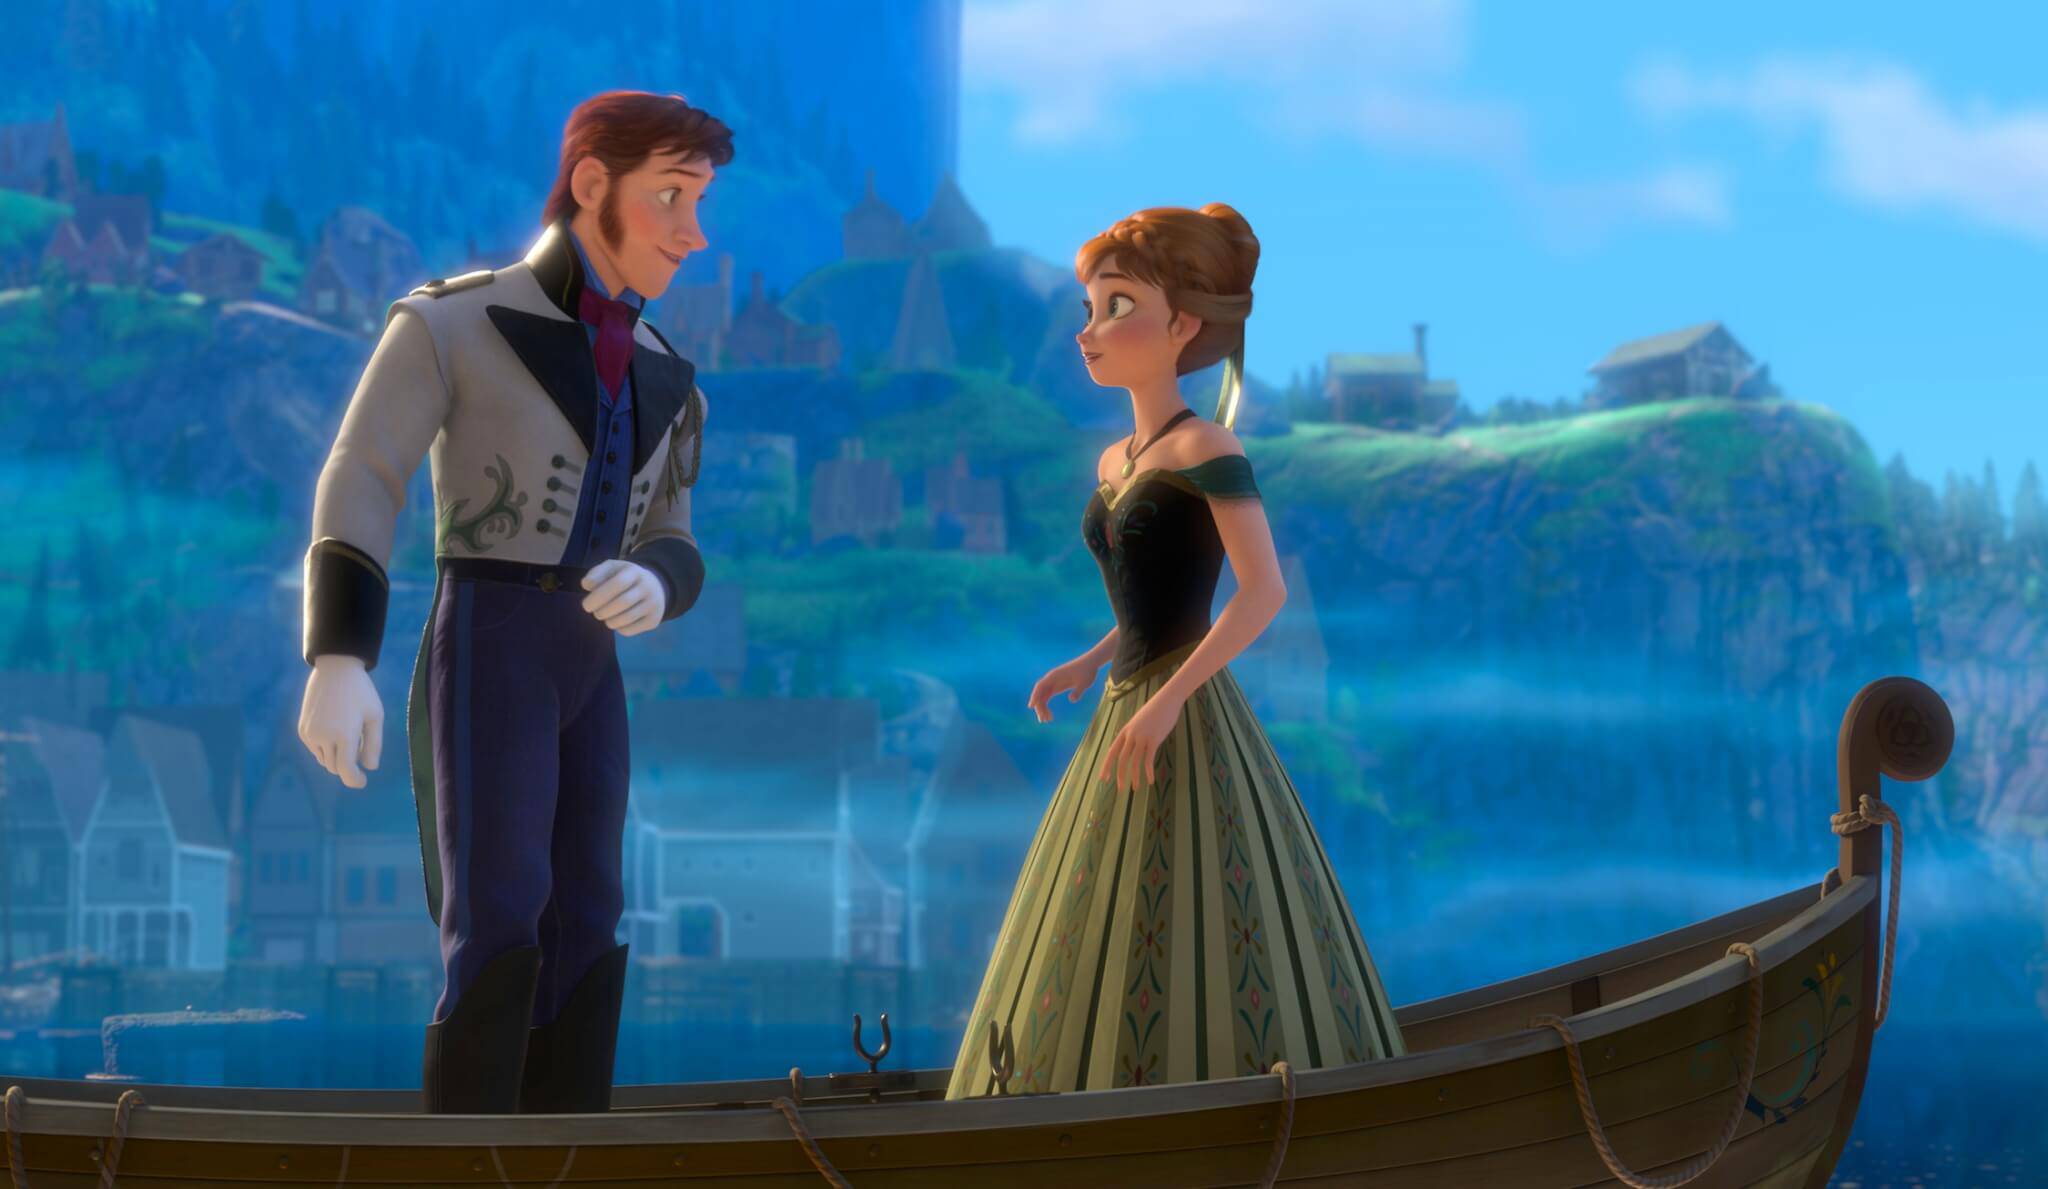 HANS and ANNA. ©2013 Disney. All Rights Reserved.